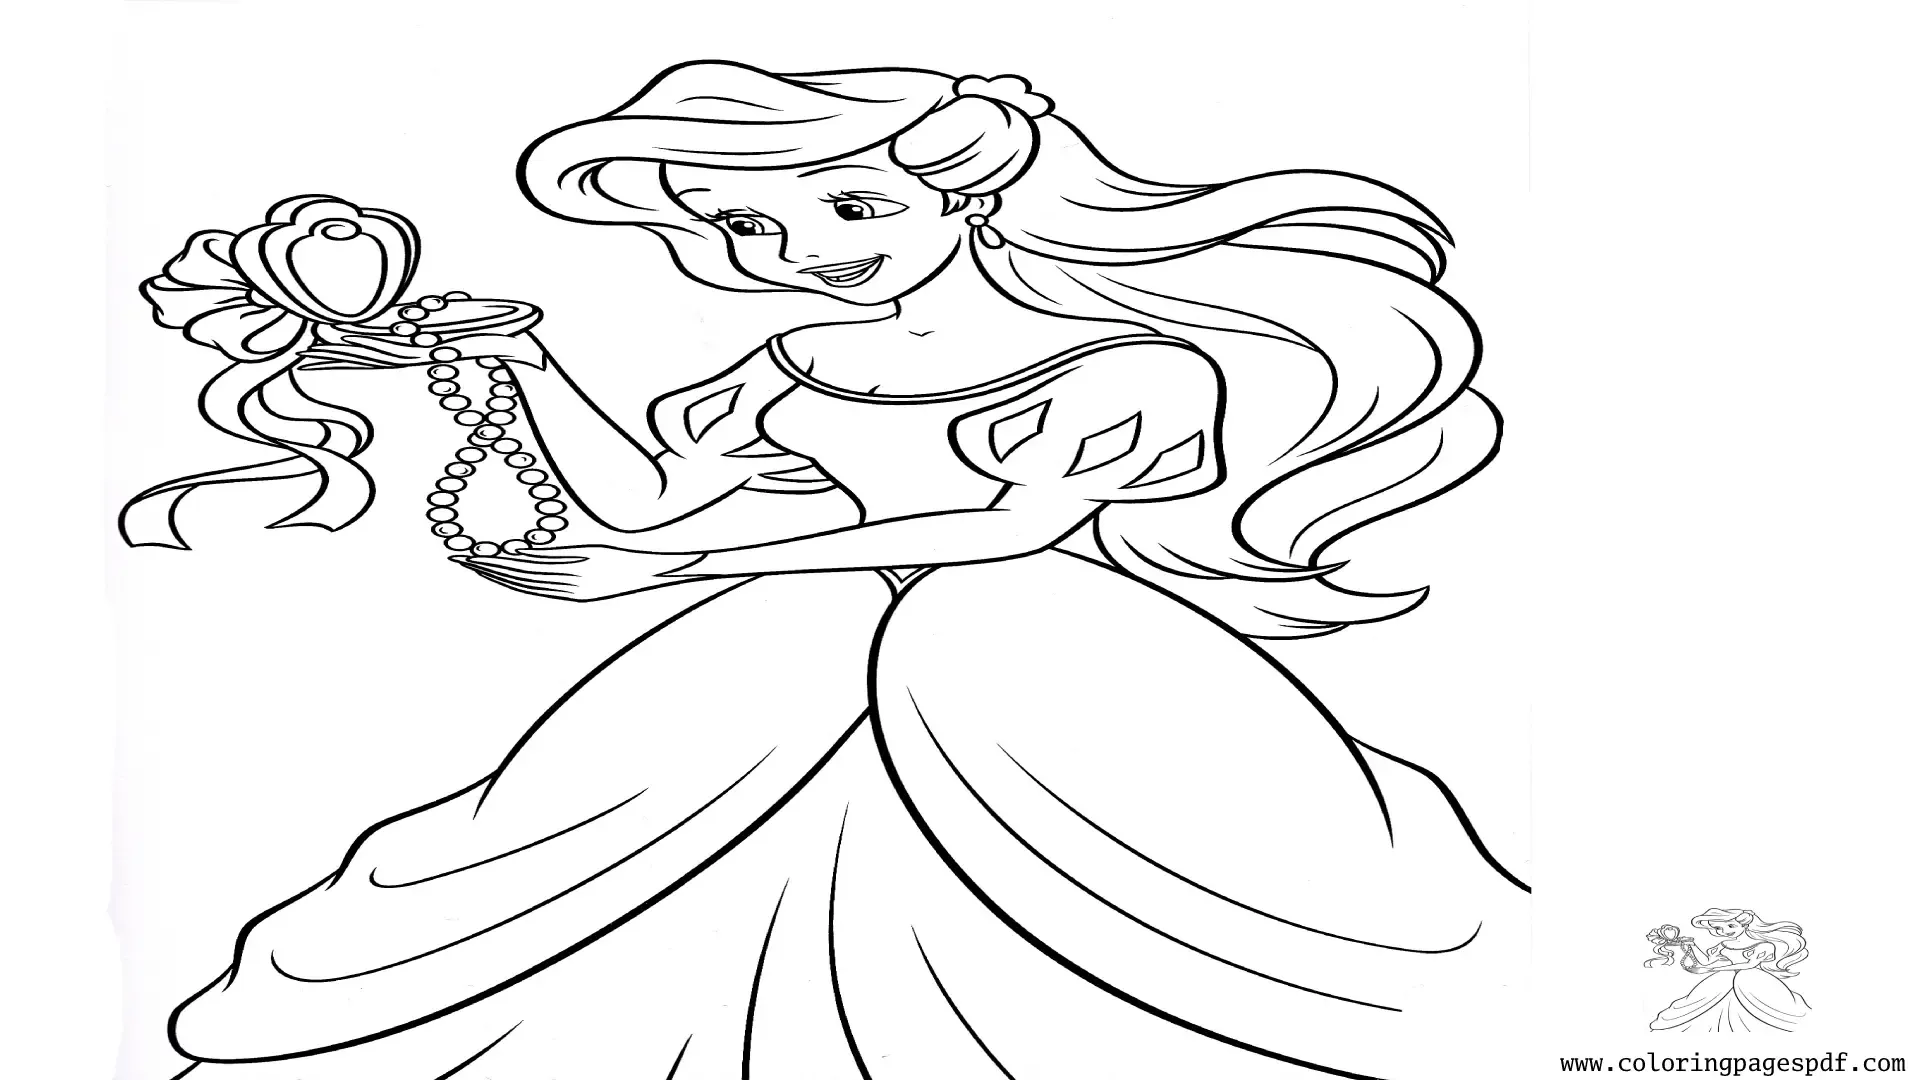 Coloring Page Of A Princess Looking In The Mirror